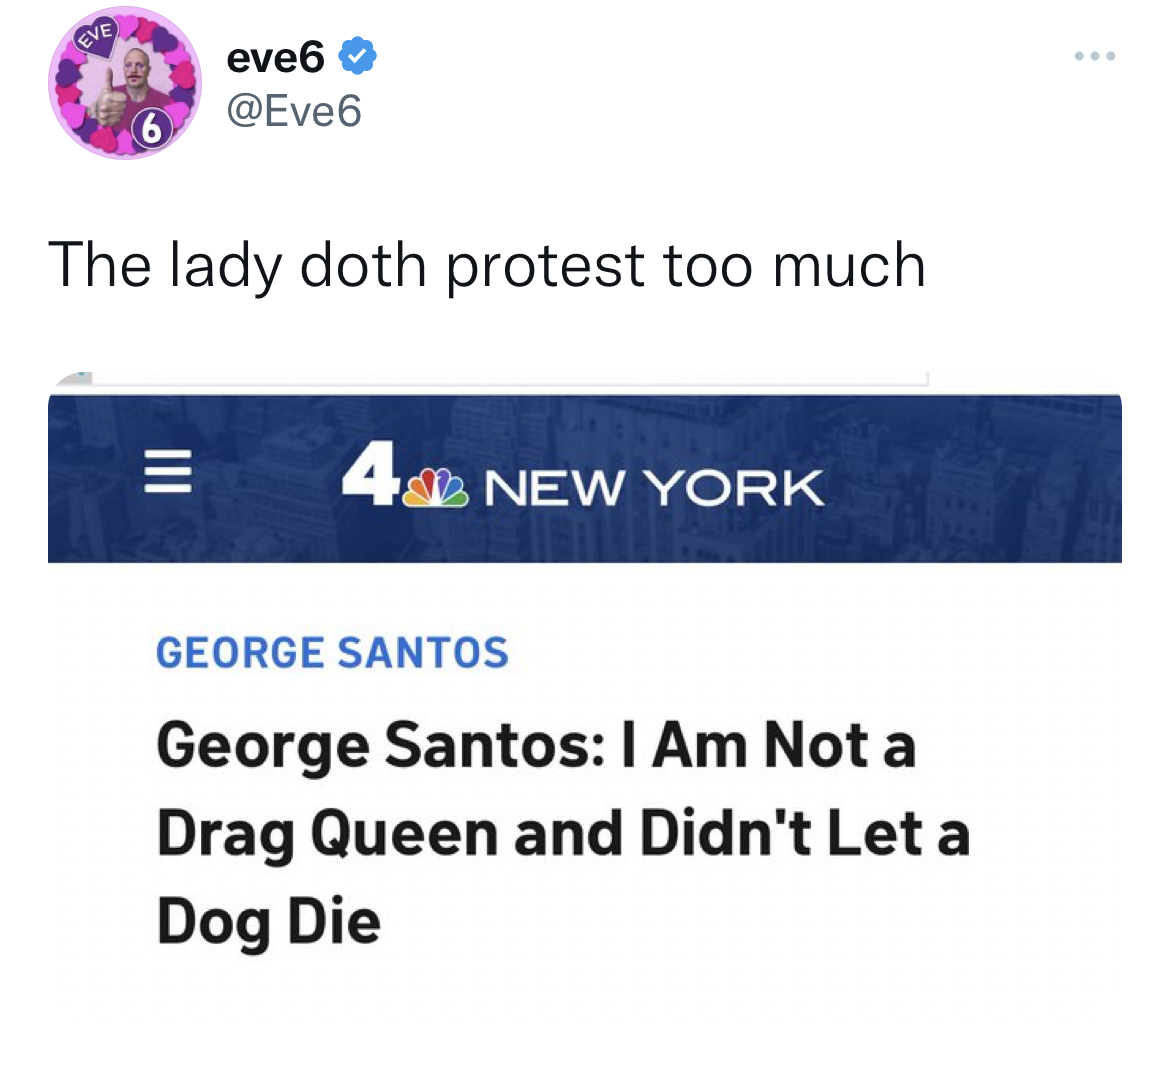 Tweets Dunking on Celebs - organization - Eve eve6 The lady doth protest too much 4 New York George Santos George Santos I Am Not a Drag Queen and Didn't Let a Dog Die